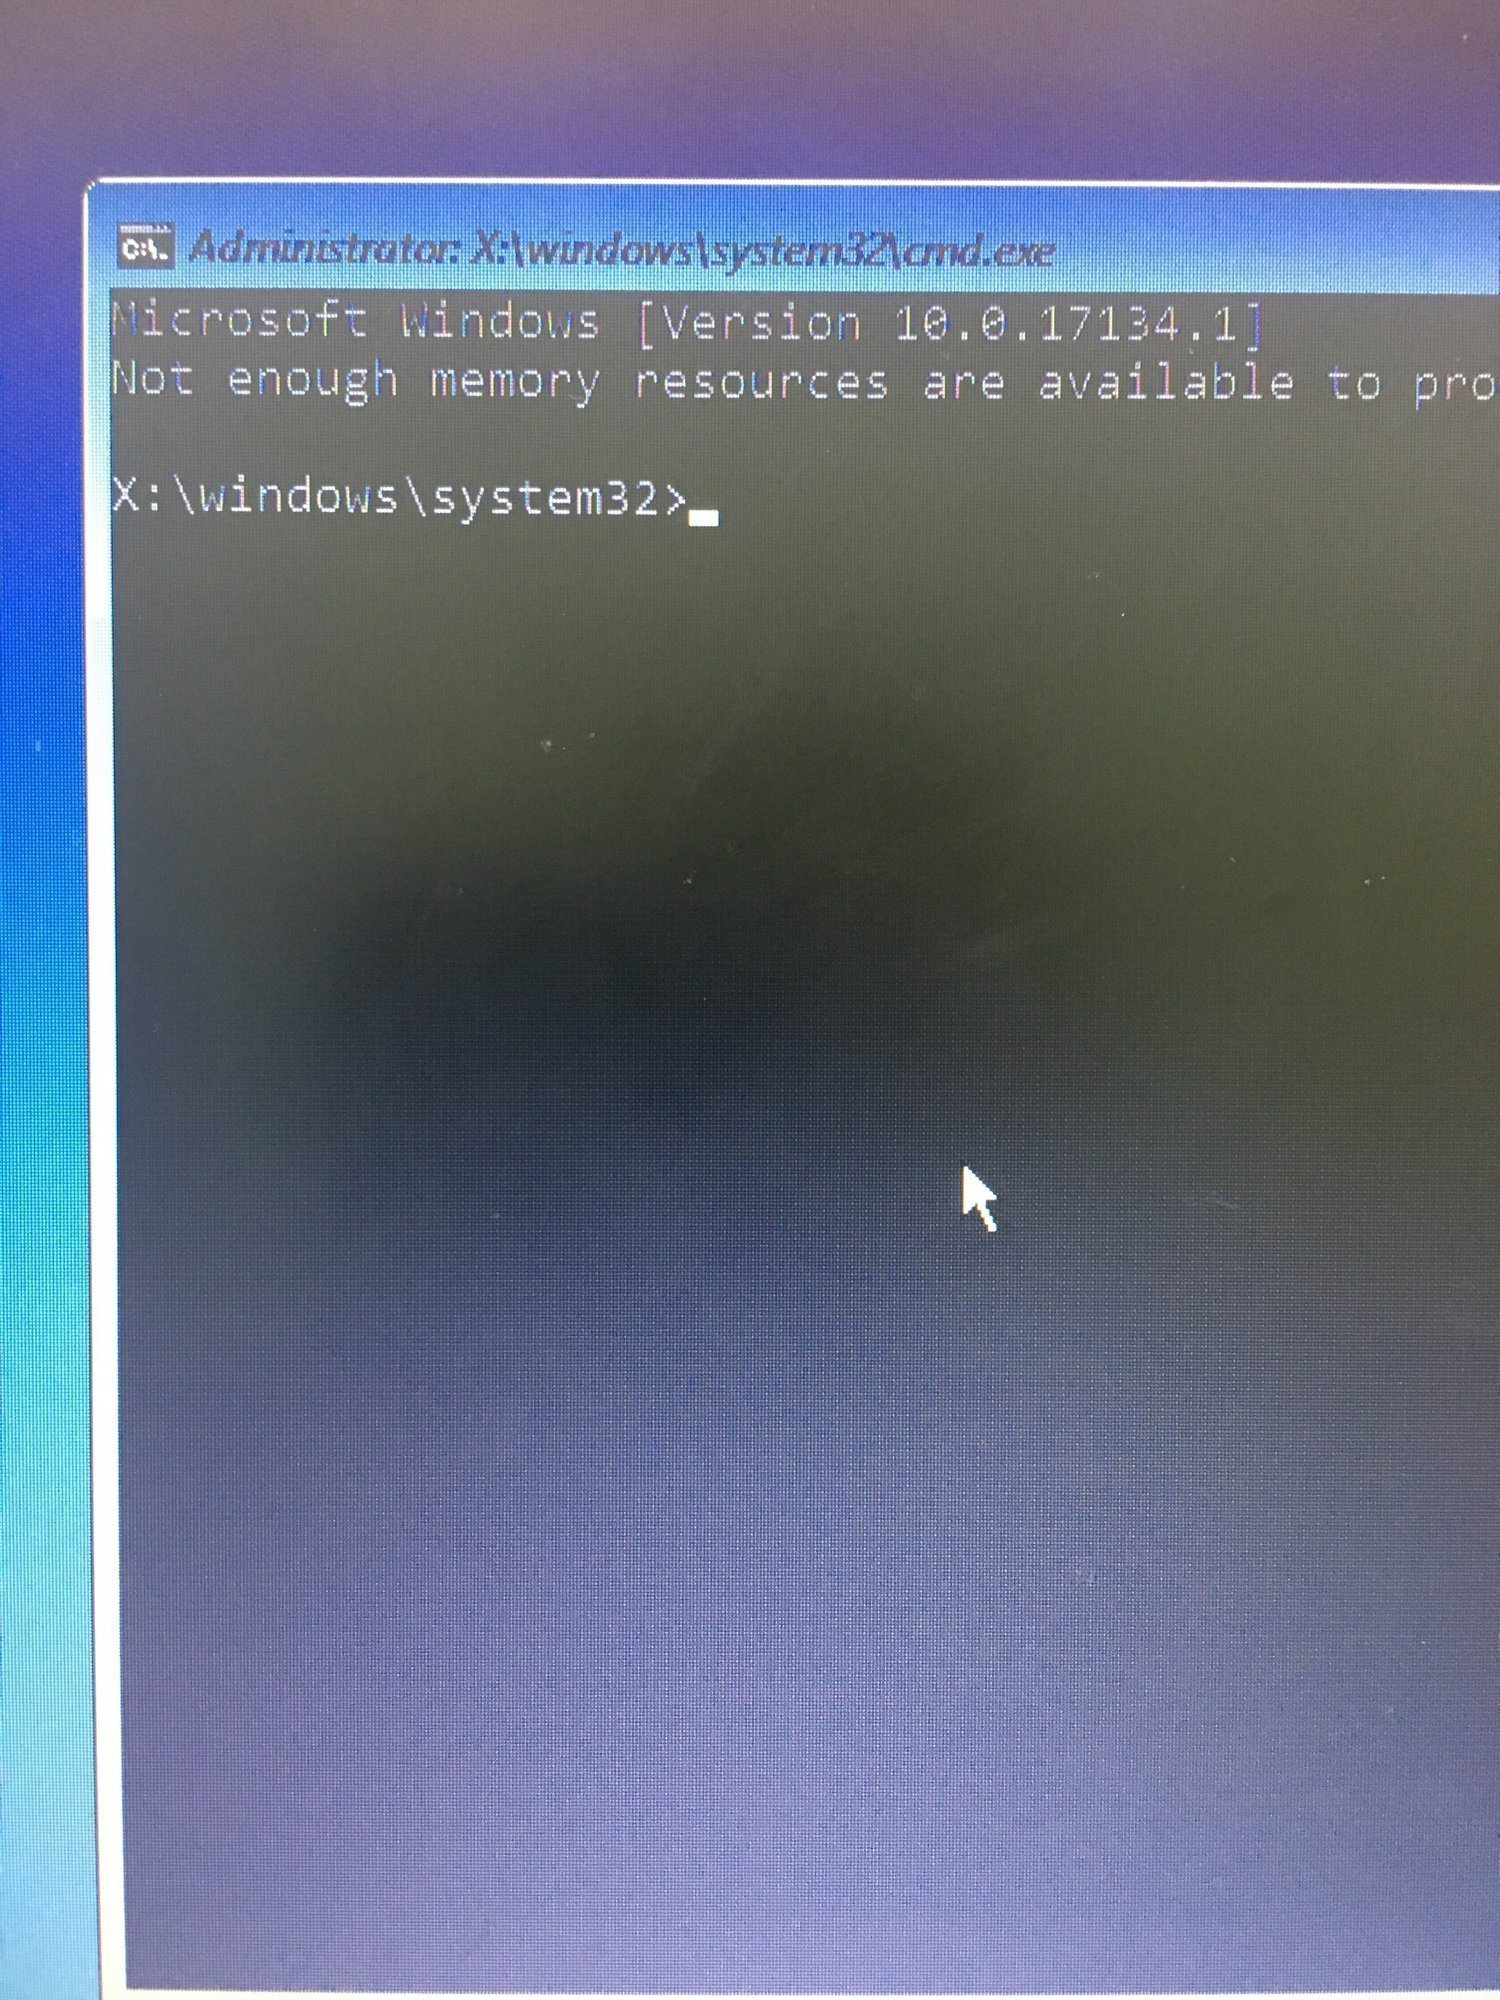 Windows 10 stopped and only command prompt working 166f1d3b-492b-4be7-9c36-def535b715ba?upload=true.jpg